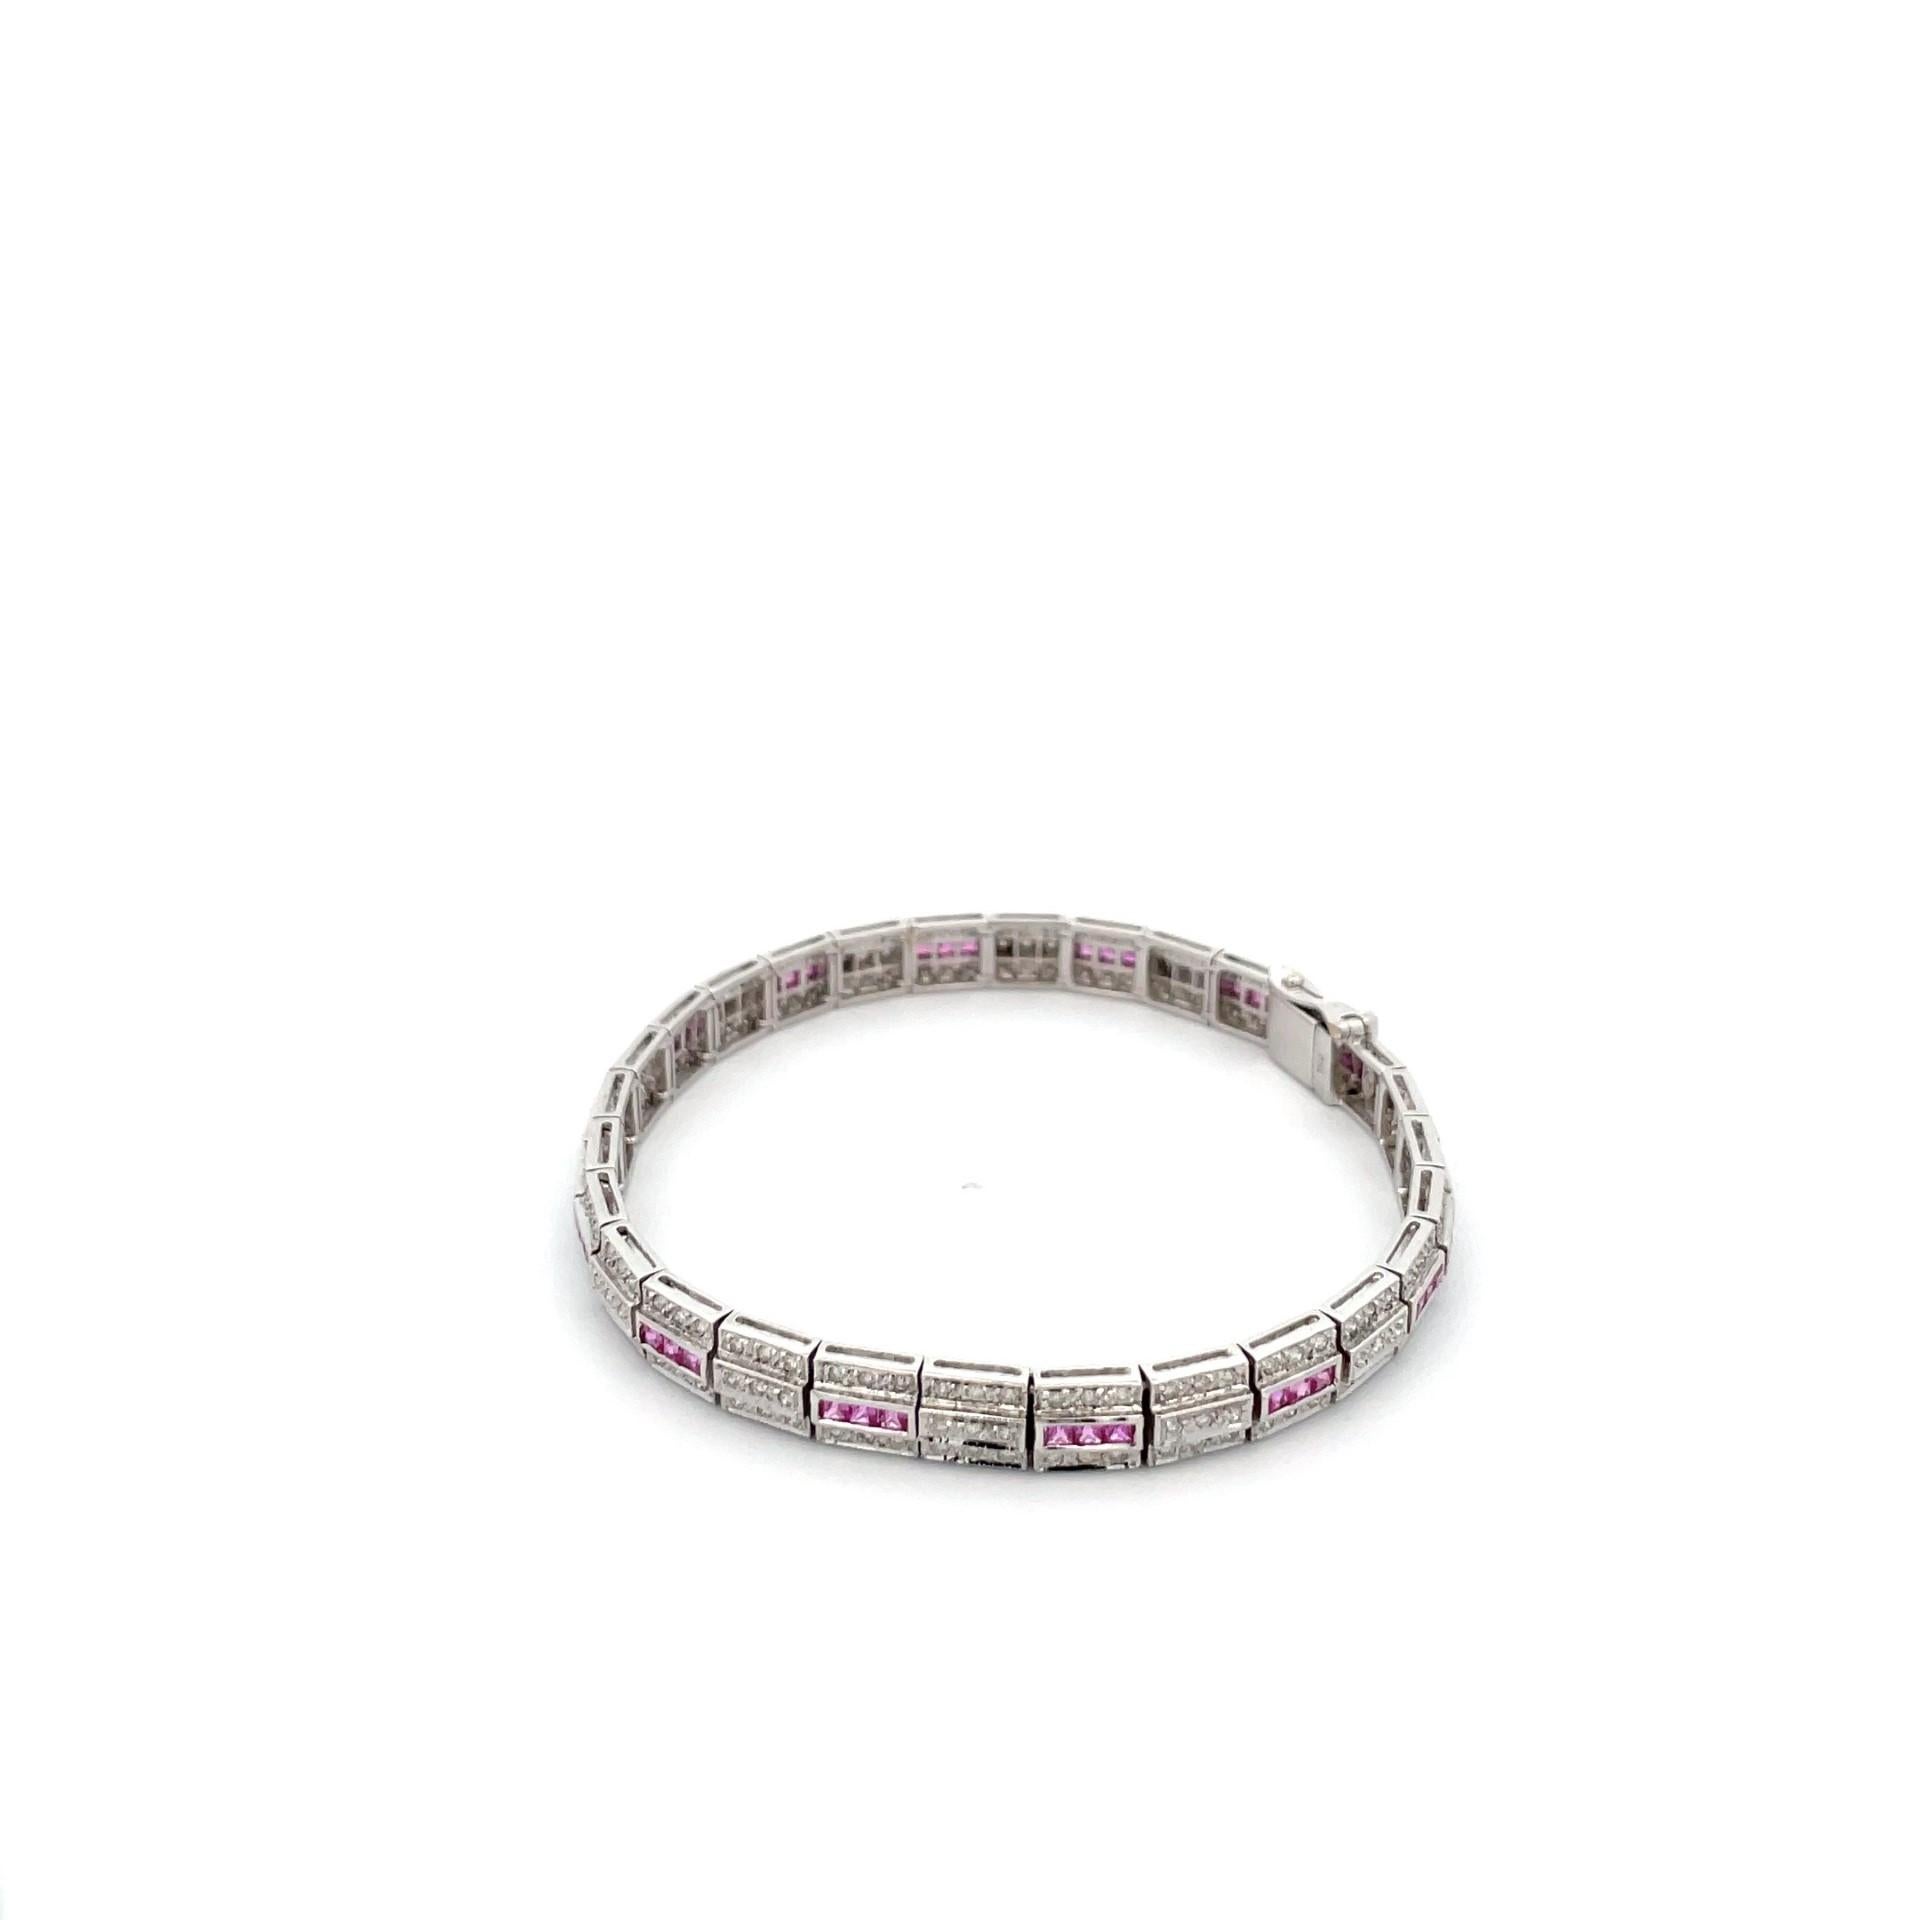 One 18kt white gold bracelet set with channel set princess cut  natural pink sapphires and natural brilliant cut diamonds. 

42 natural pink sapphires weighing 2.29ct total weight

214 brilliant cut diamonds, weighing 1.18ct total weight

Gold 18kt